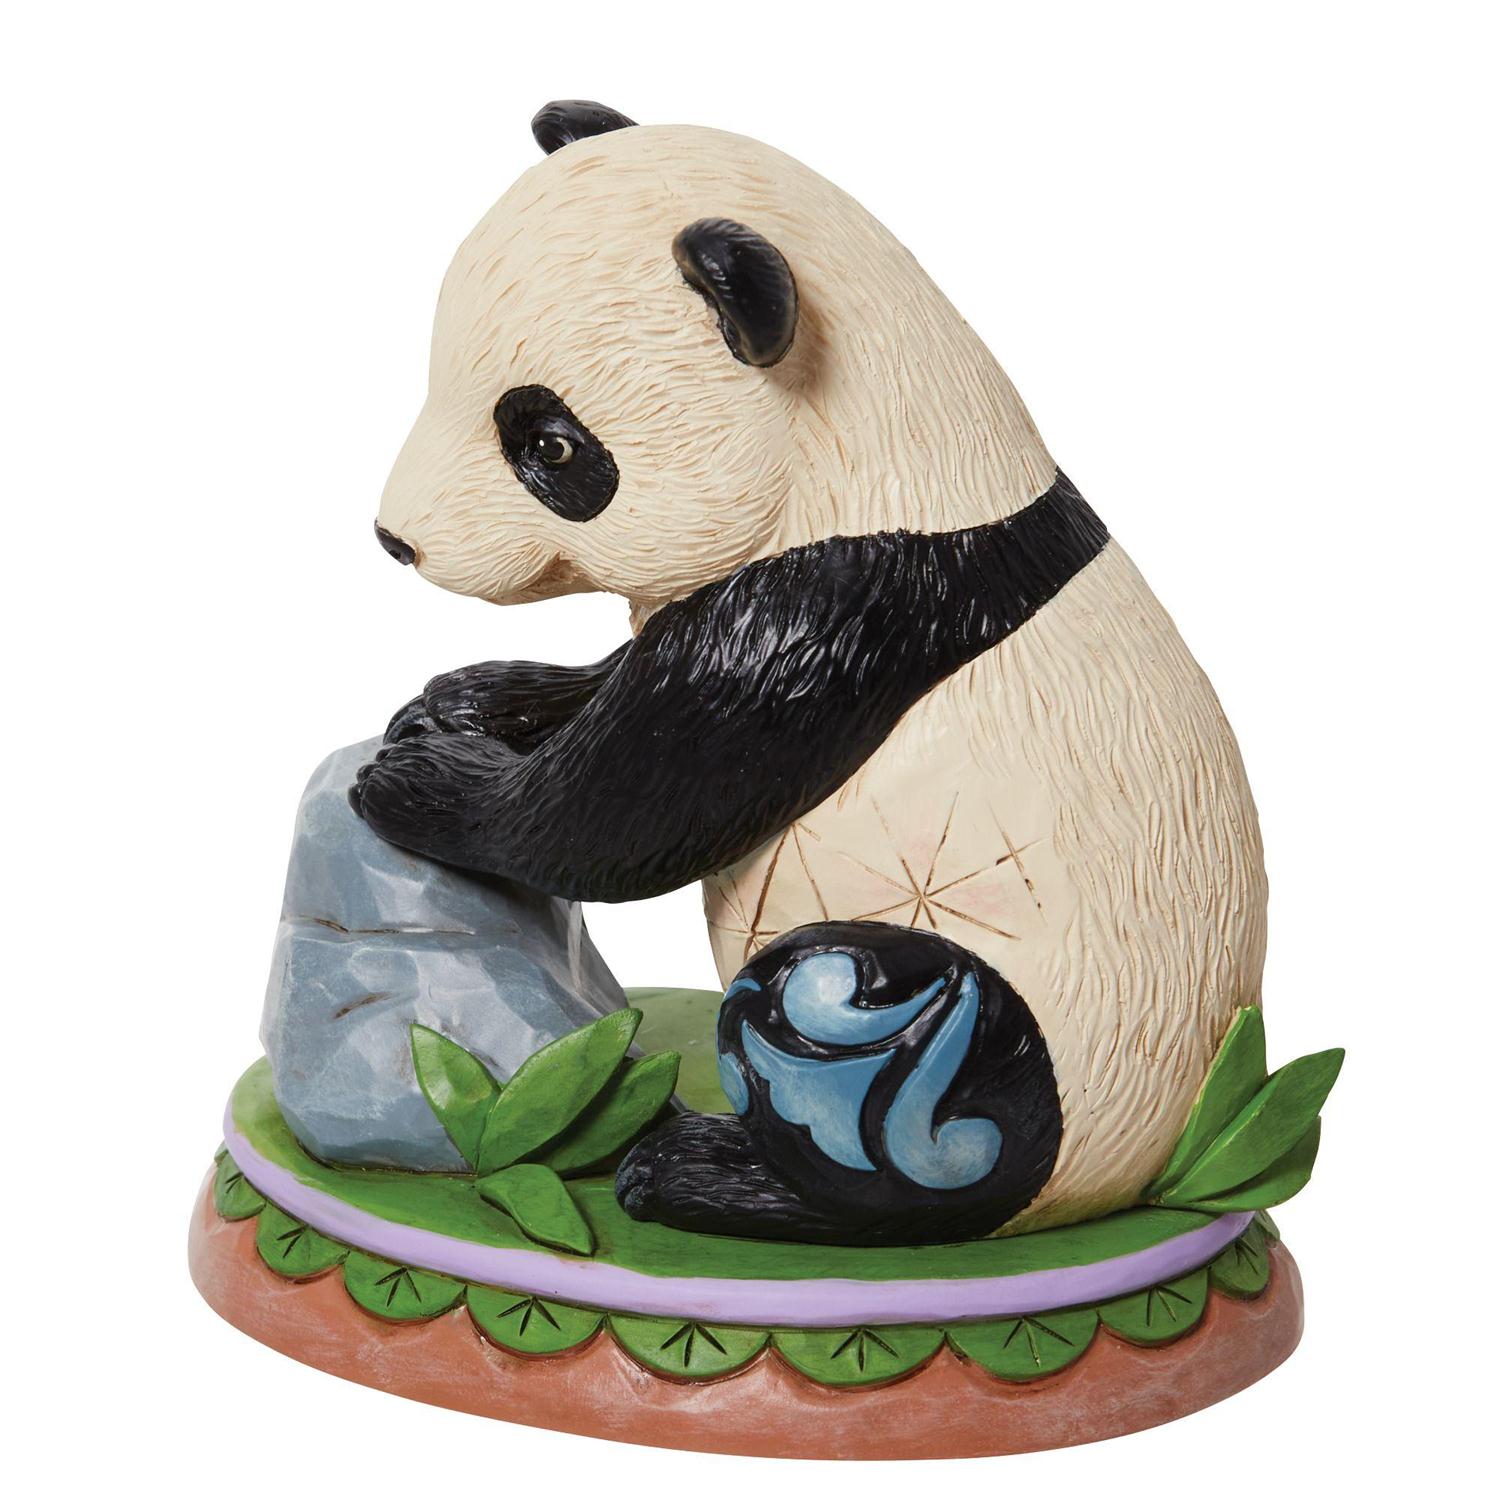 Enesco Gifts Jim Shore Animal Planet Giant Panda Cub Figurine Free Shipping Iveys Gifts And Decor